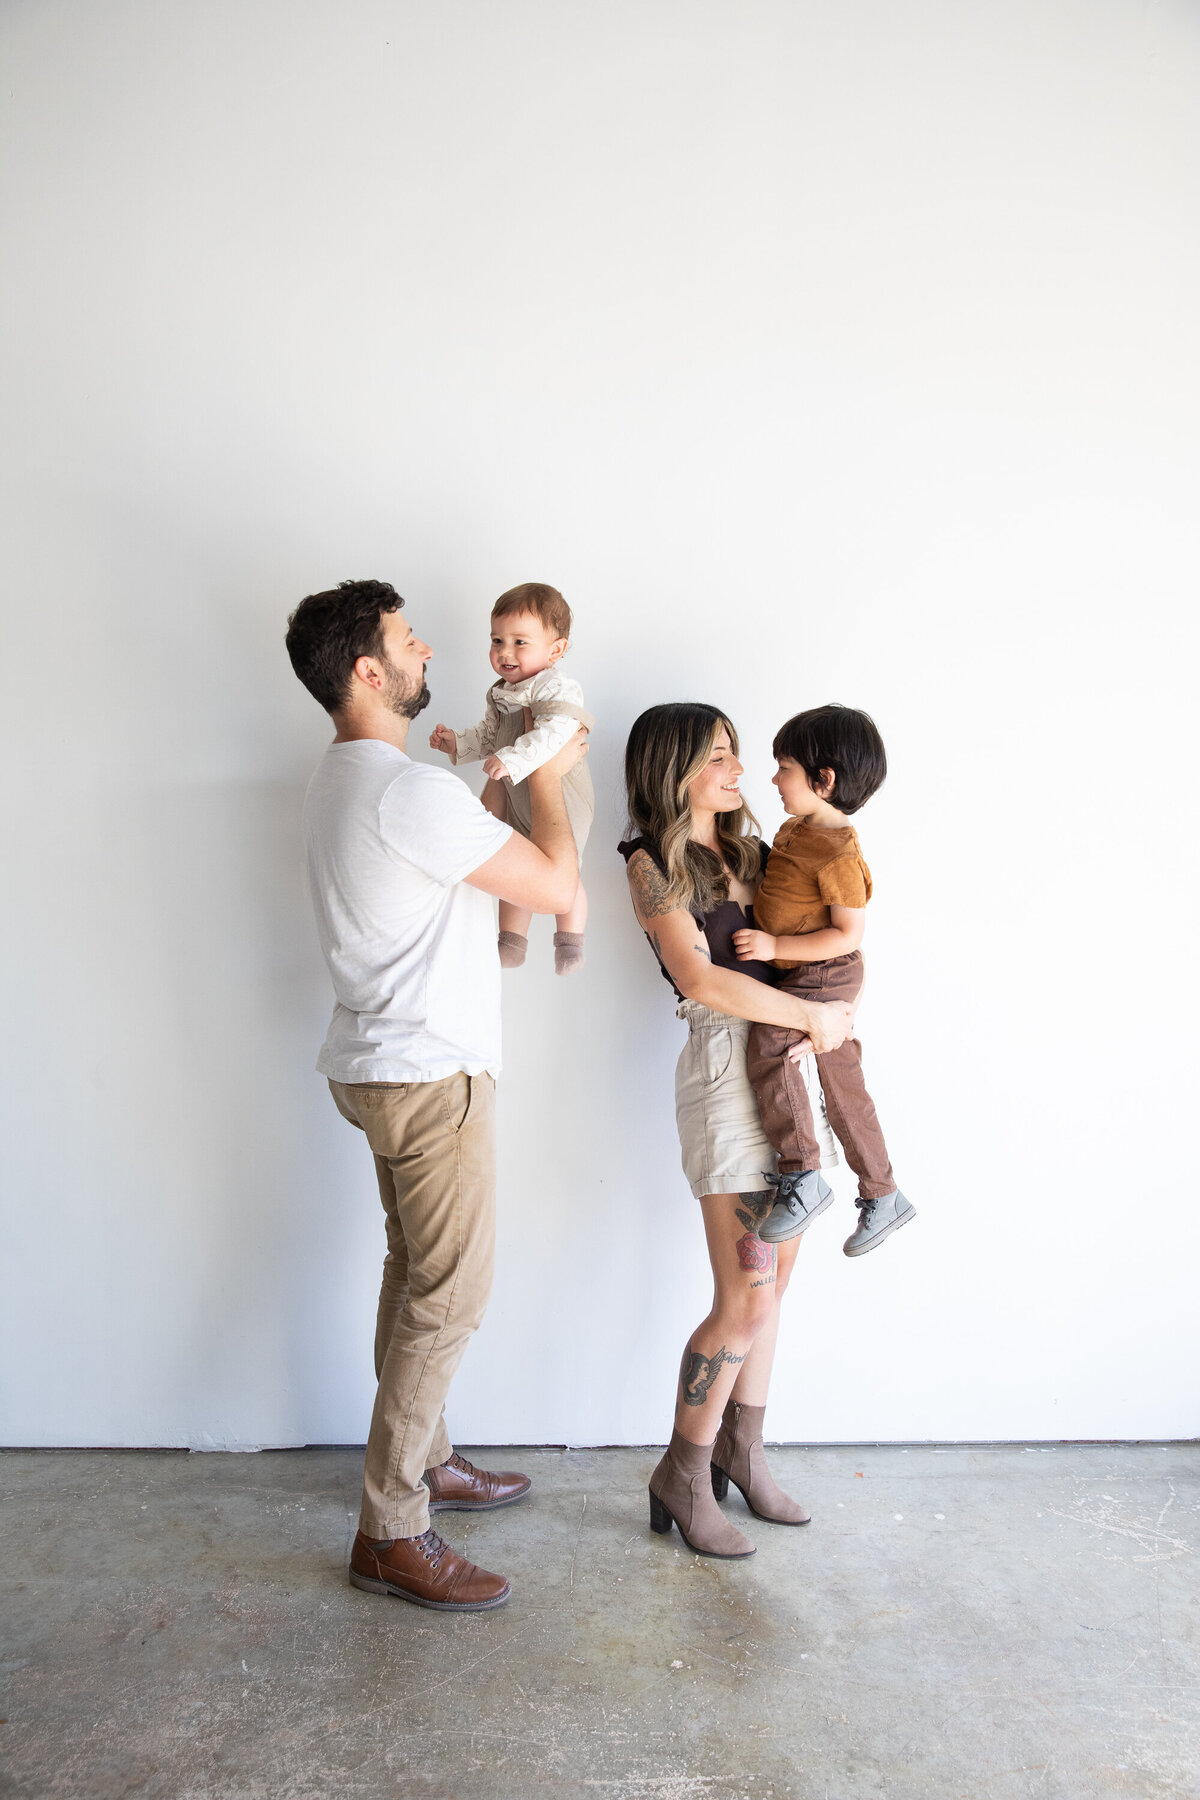 An Austin wedding photographer captures a family standing in front of a white wall.